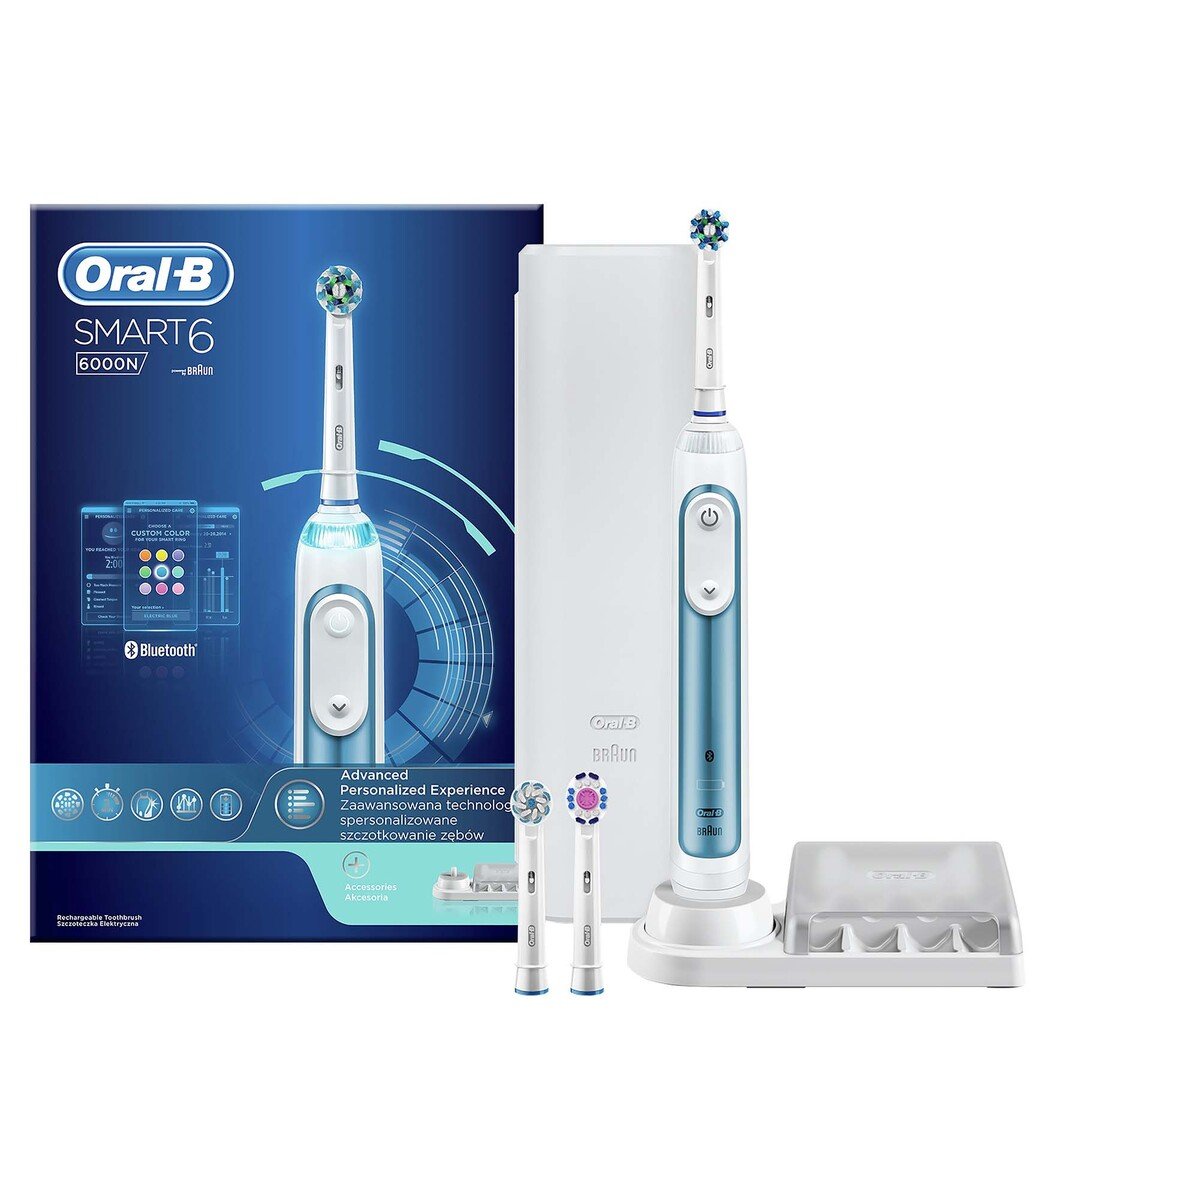 Oral-B Smart 6 6000N Rechargeable Toothbrush with Bluetooth Connectivity D700.535.5